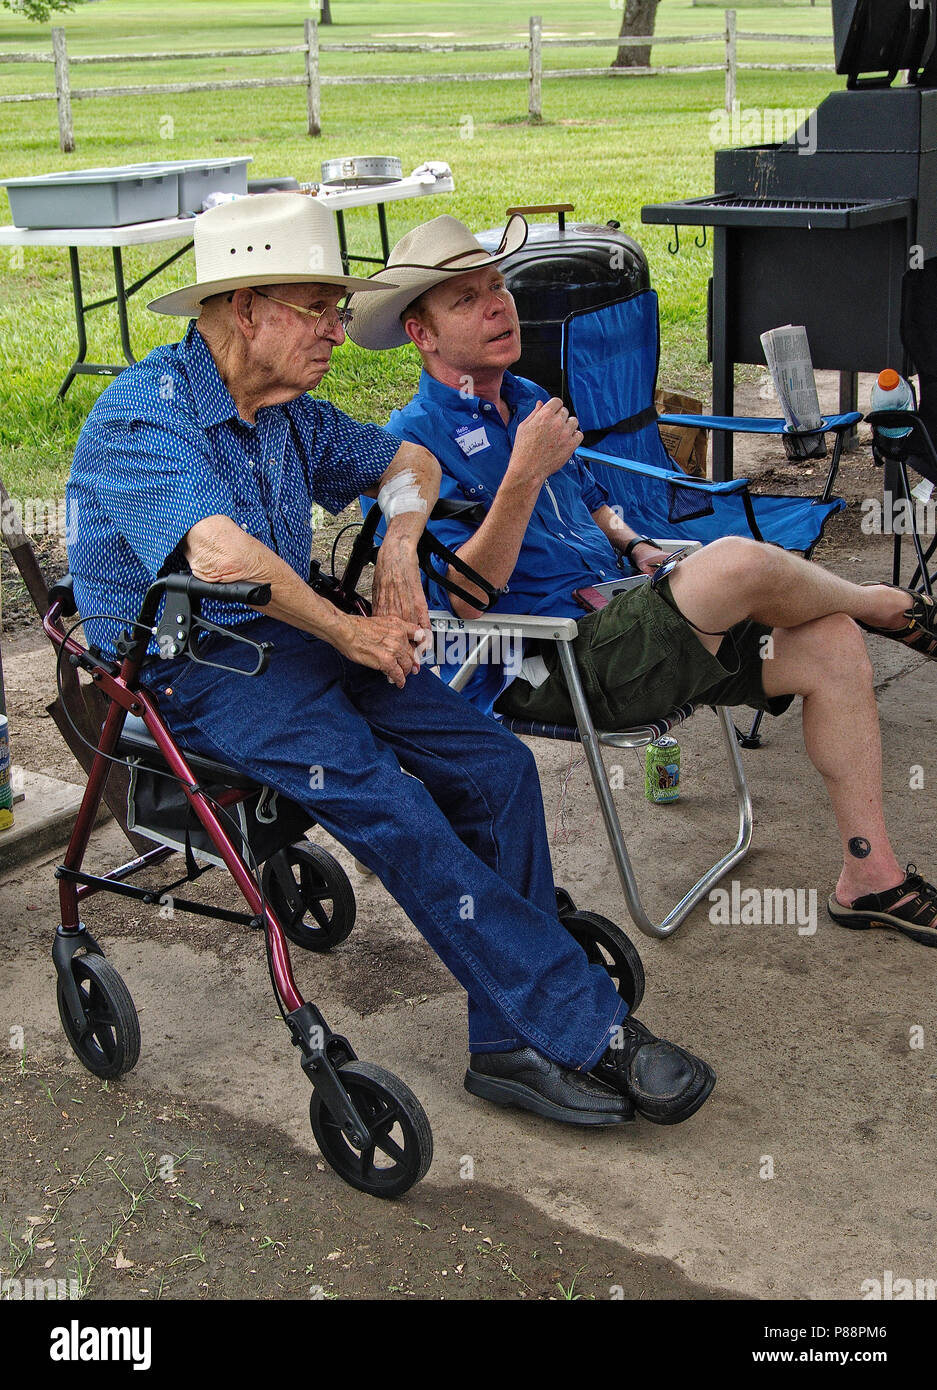 Elderly man sitting on walker seat for handicap talking to young man Stock  Photo - Alamy